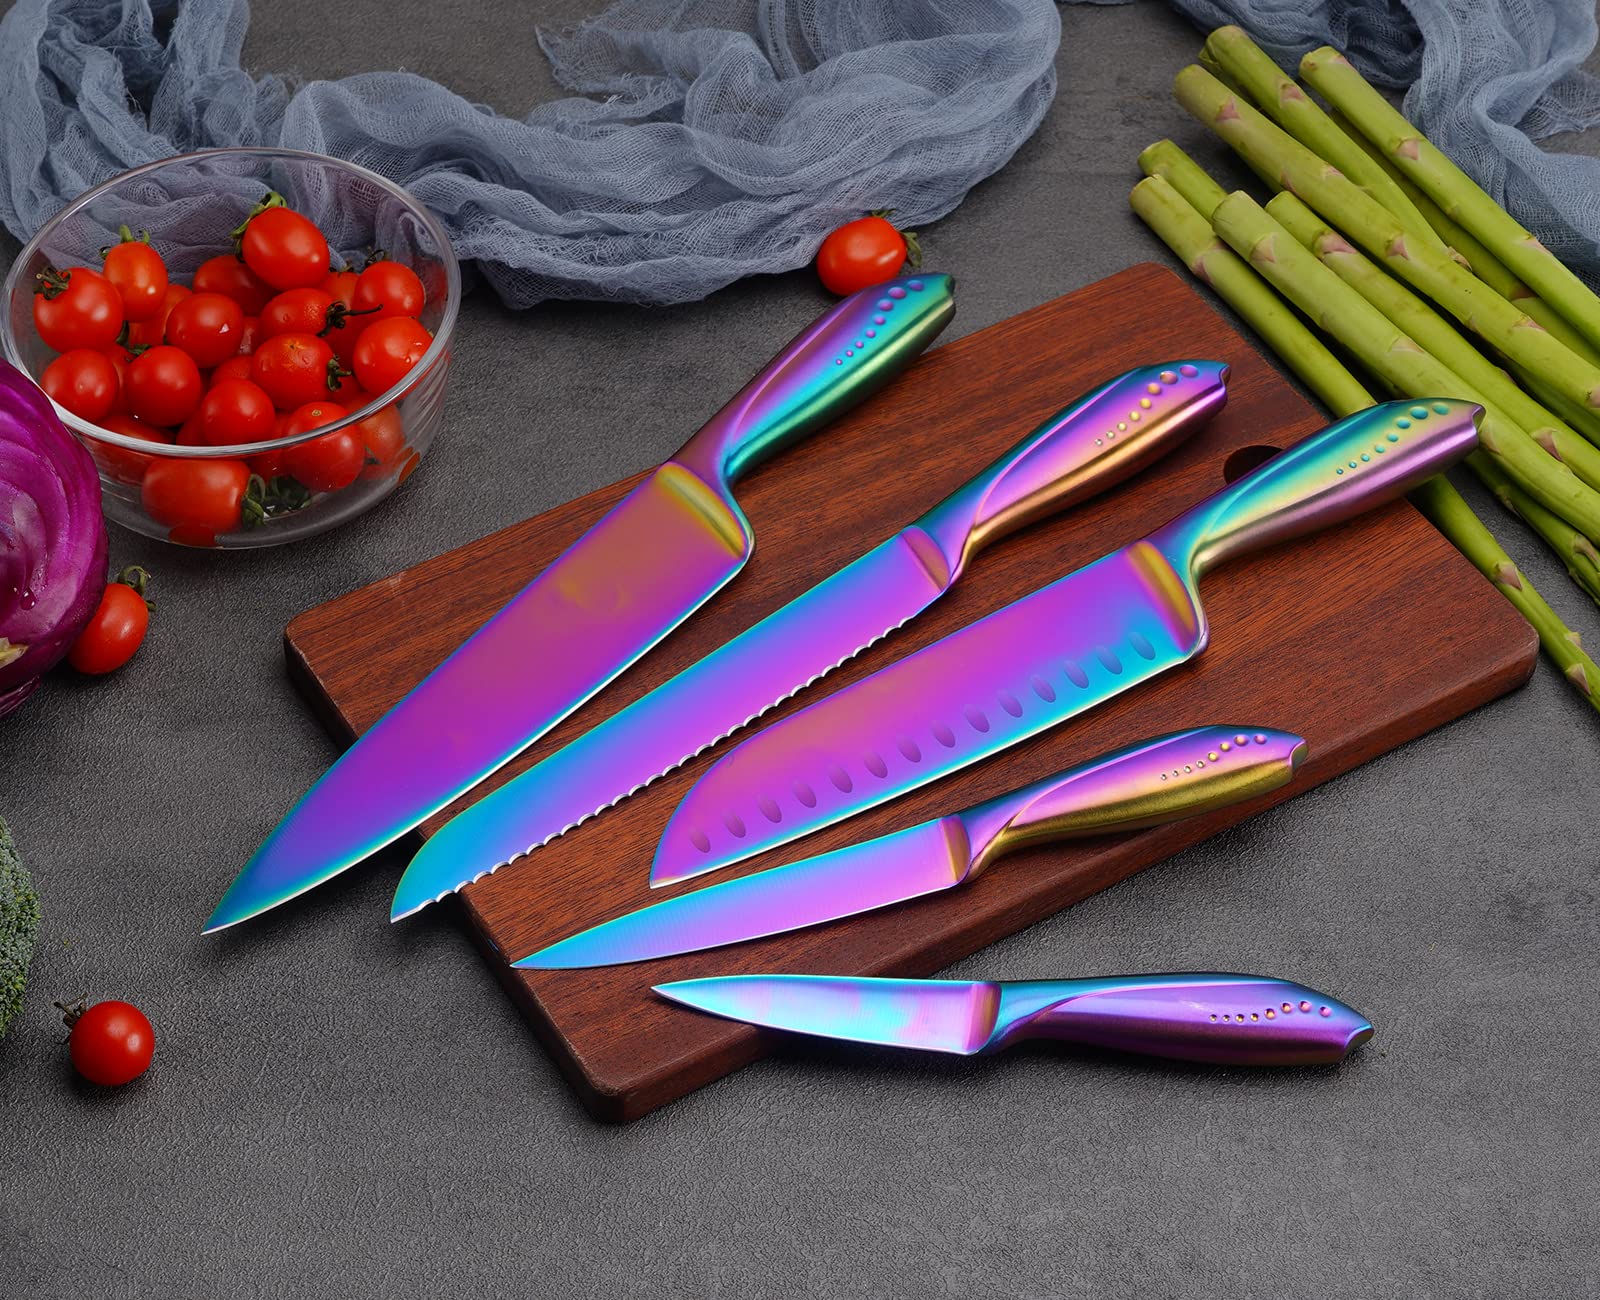 Hollory Rainbow Kitchen Knife Set 5 Piece, Super Sharp German Stainless Steel Blade with 8 in Chef, 8 in Bread, 7 in Santoku, 5 in Utility, 3.5 in Paring - Gift Box